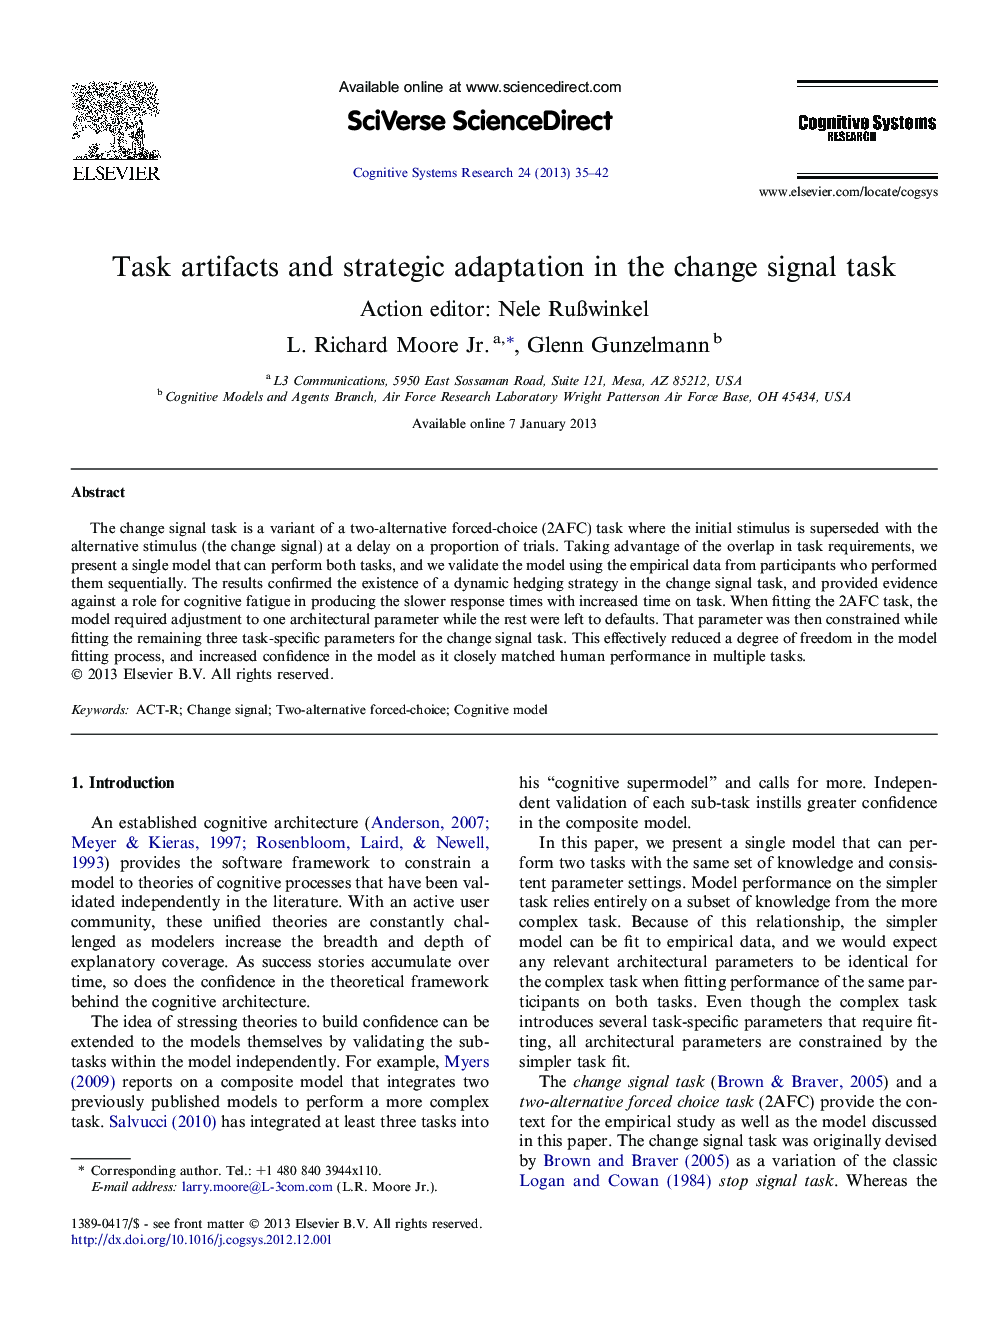 Task artifacts and strategic adaptation in the change signal task